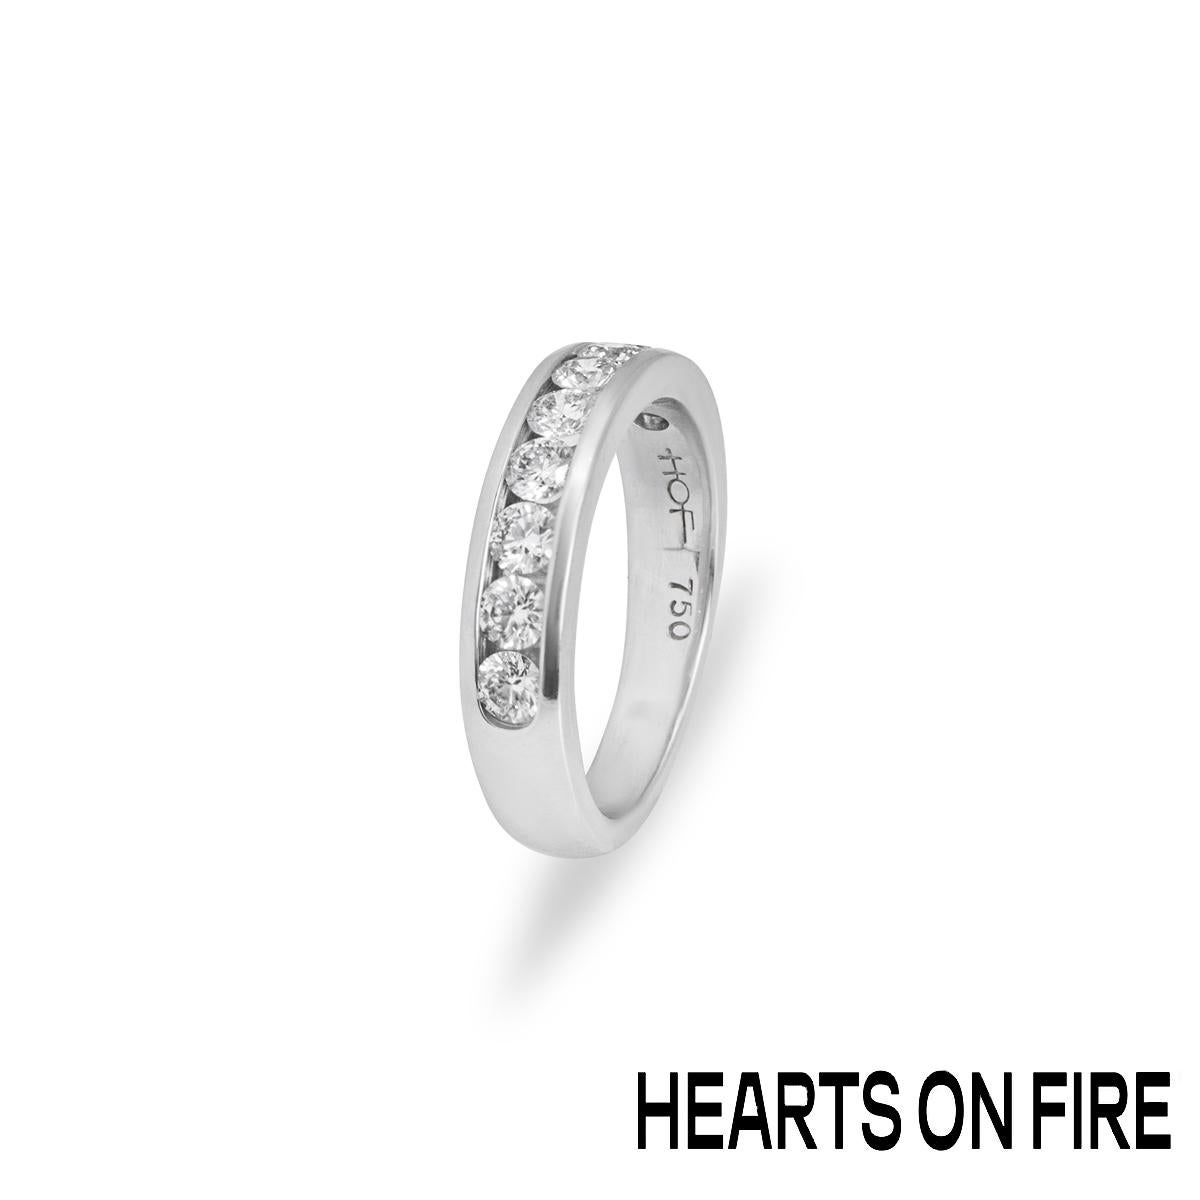 A stunning 18k white gold diamond half eternity ring by Hearts on Fire. The wedding band is channel set with 9 round brilliant cut diamonds with an approximate total weight of 0.73ct, G-H colour and VS clarity. The 4.3mm ring has a gross weight of